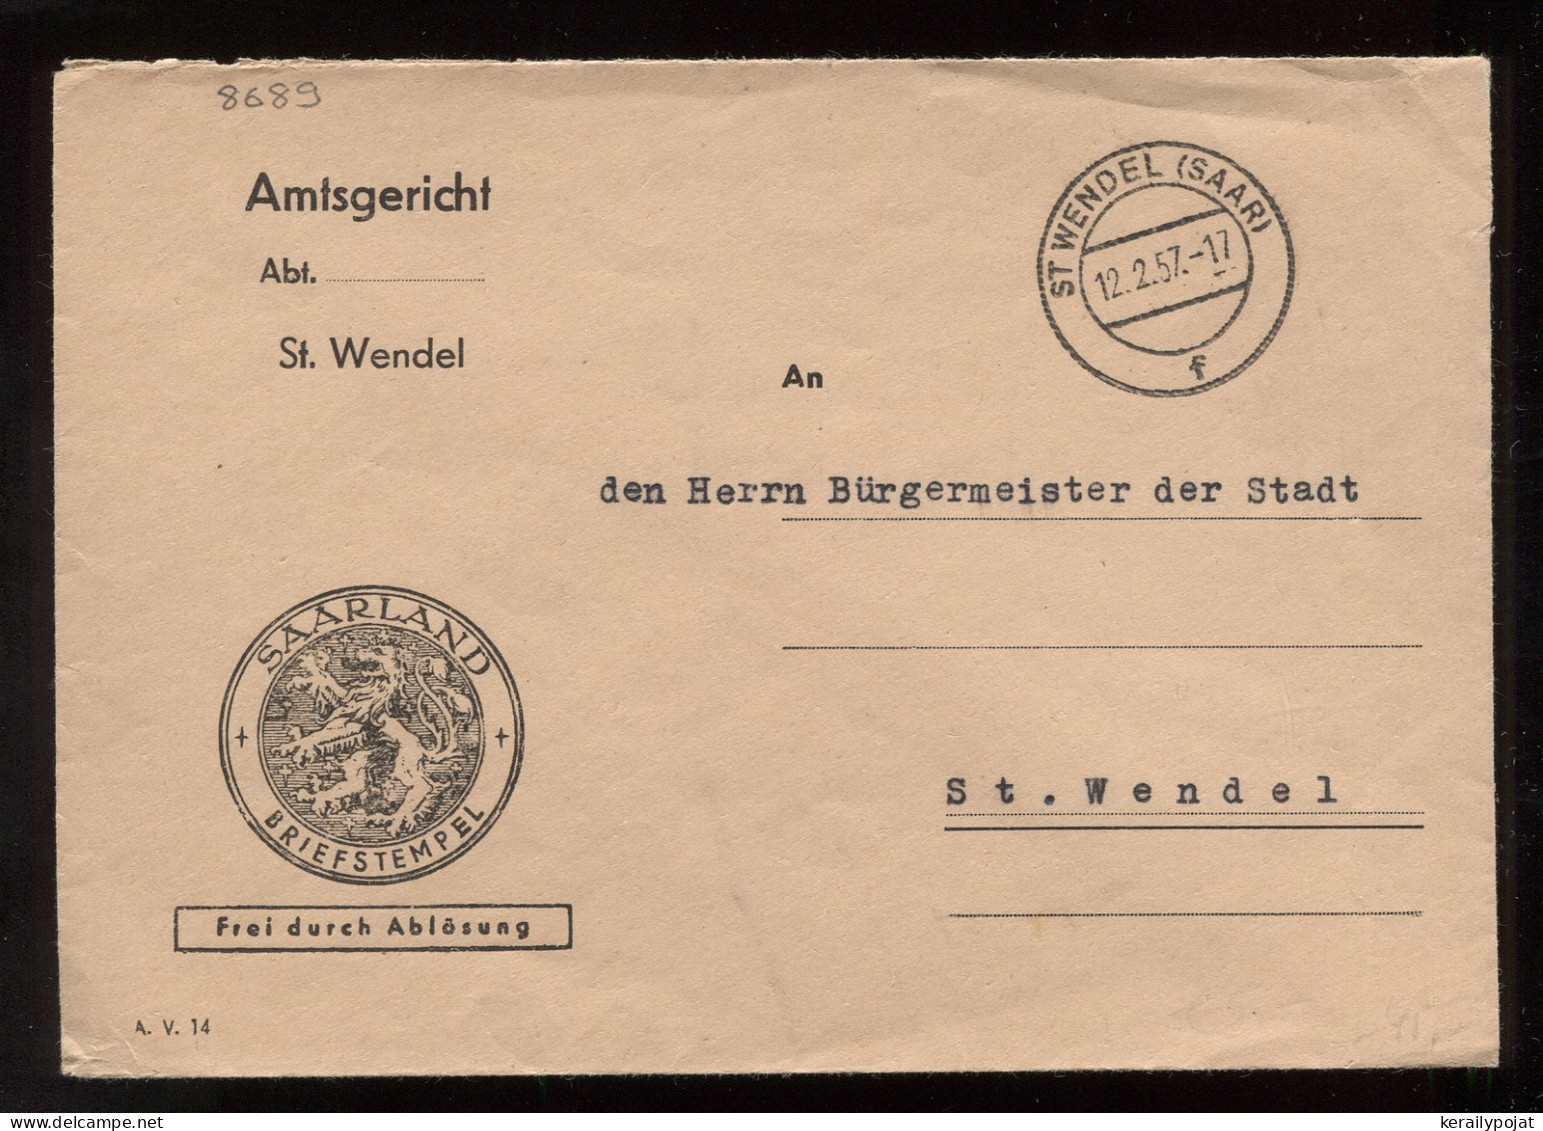 Saarland 1957 St.Wendel Burgermeister Cover__(8689) - Covers & Documents